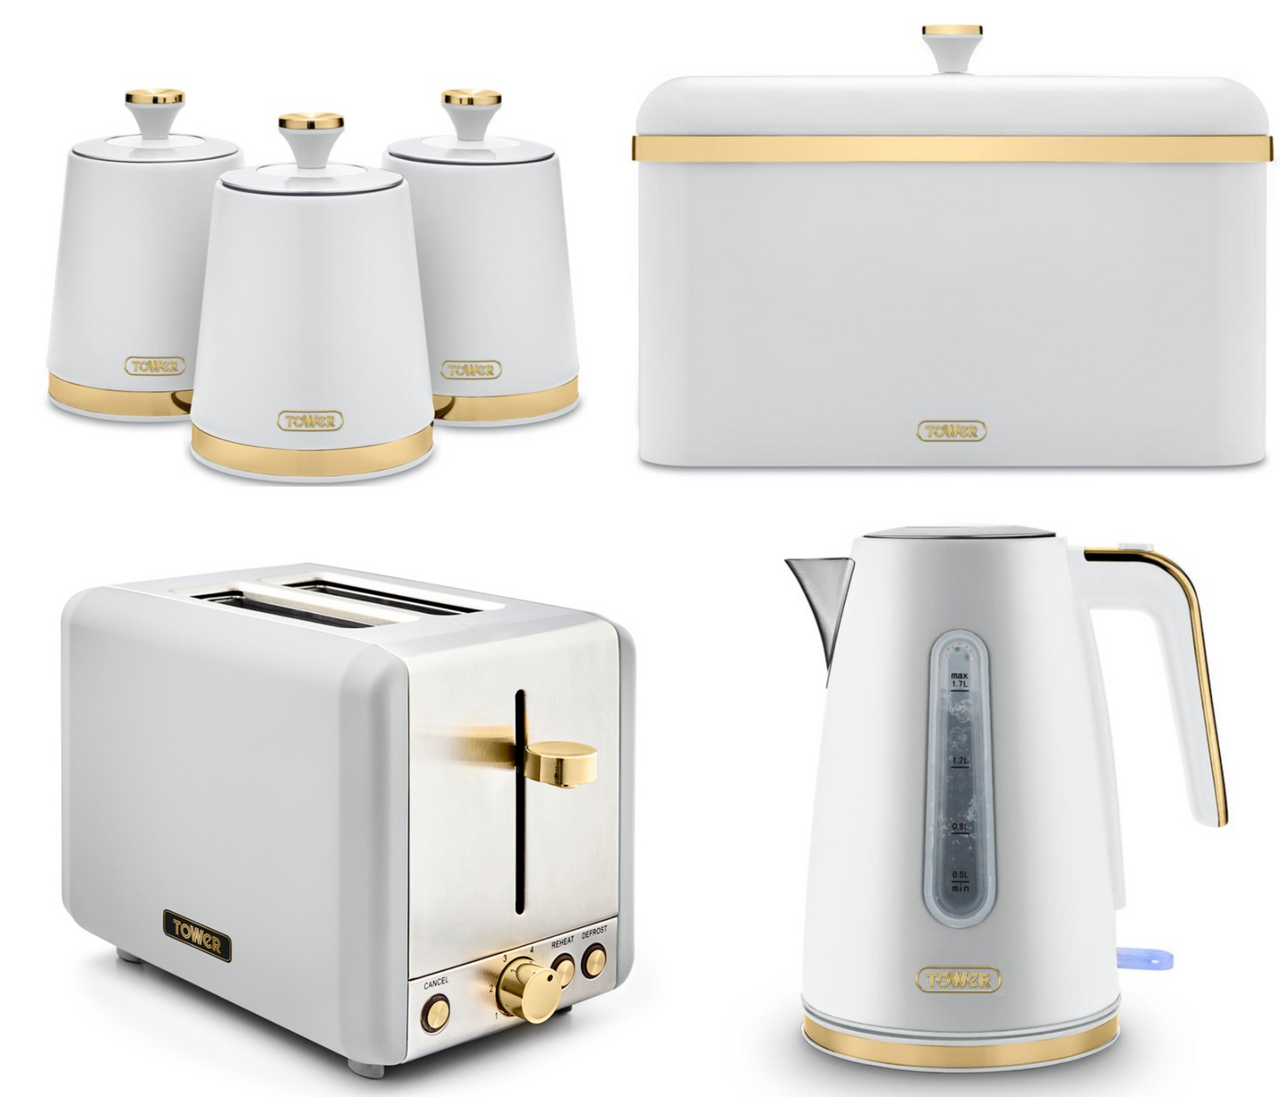 Tower Cavaletto White Jug Kettle 2 Slice Toaster Bread Bin & Canisters Set of 6